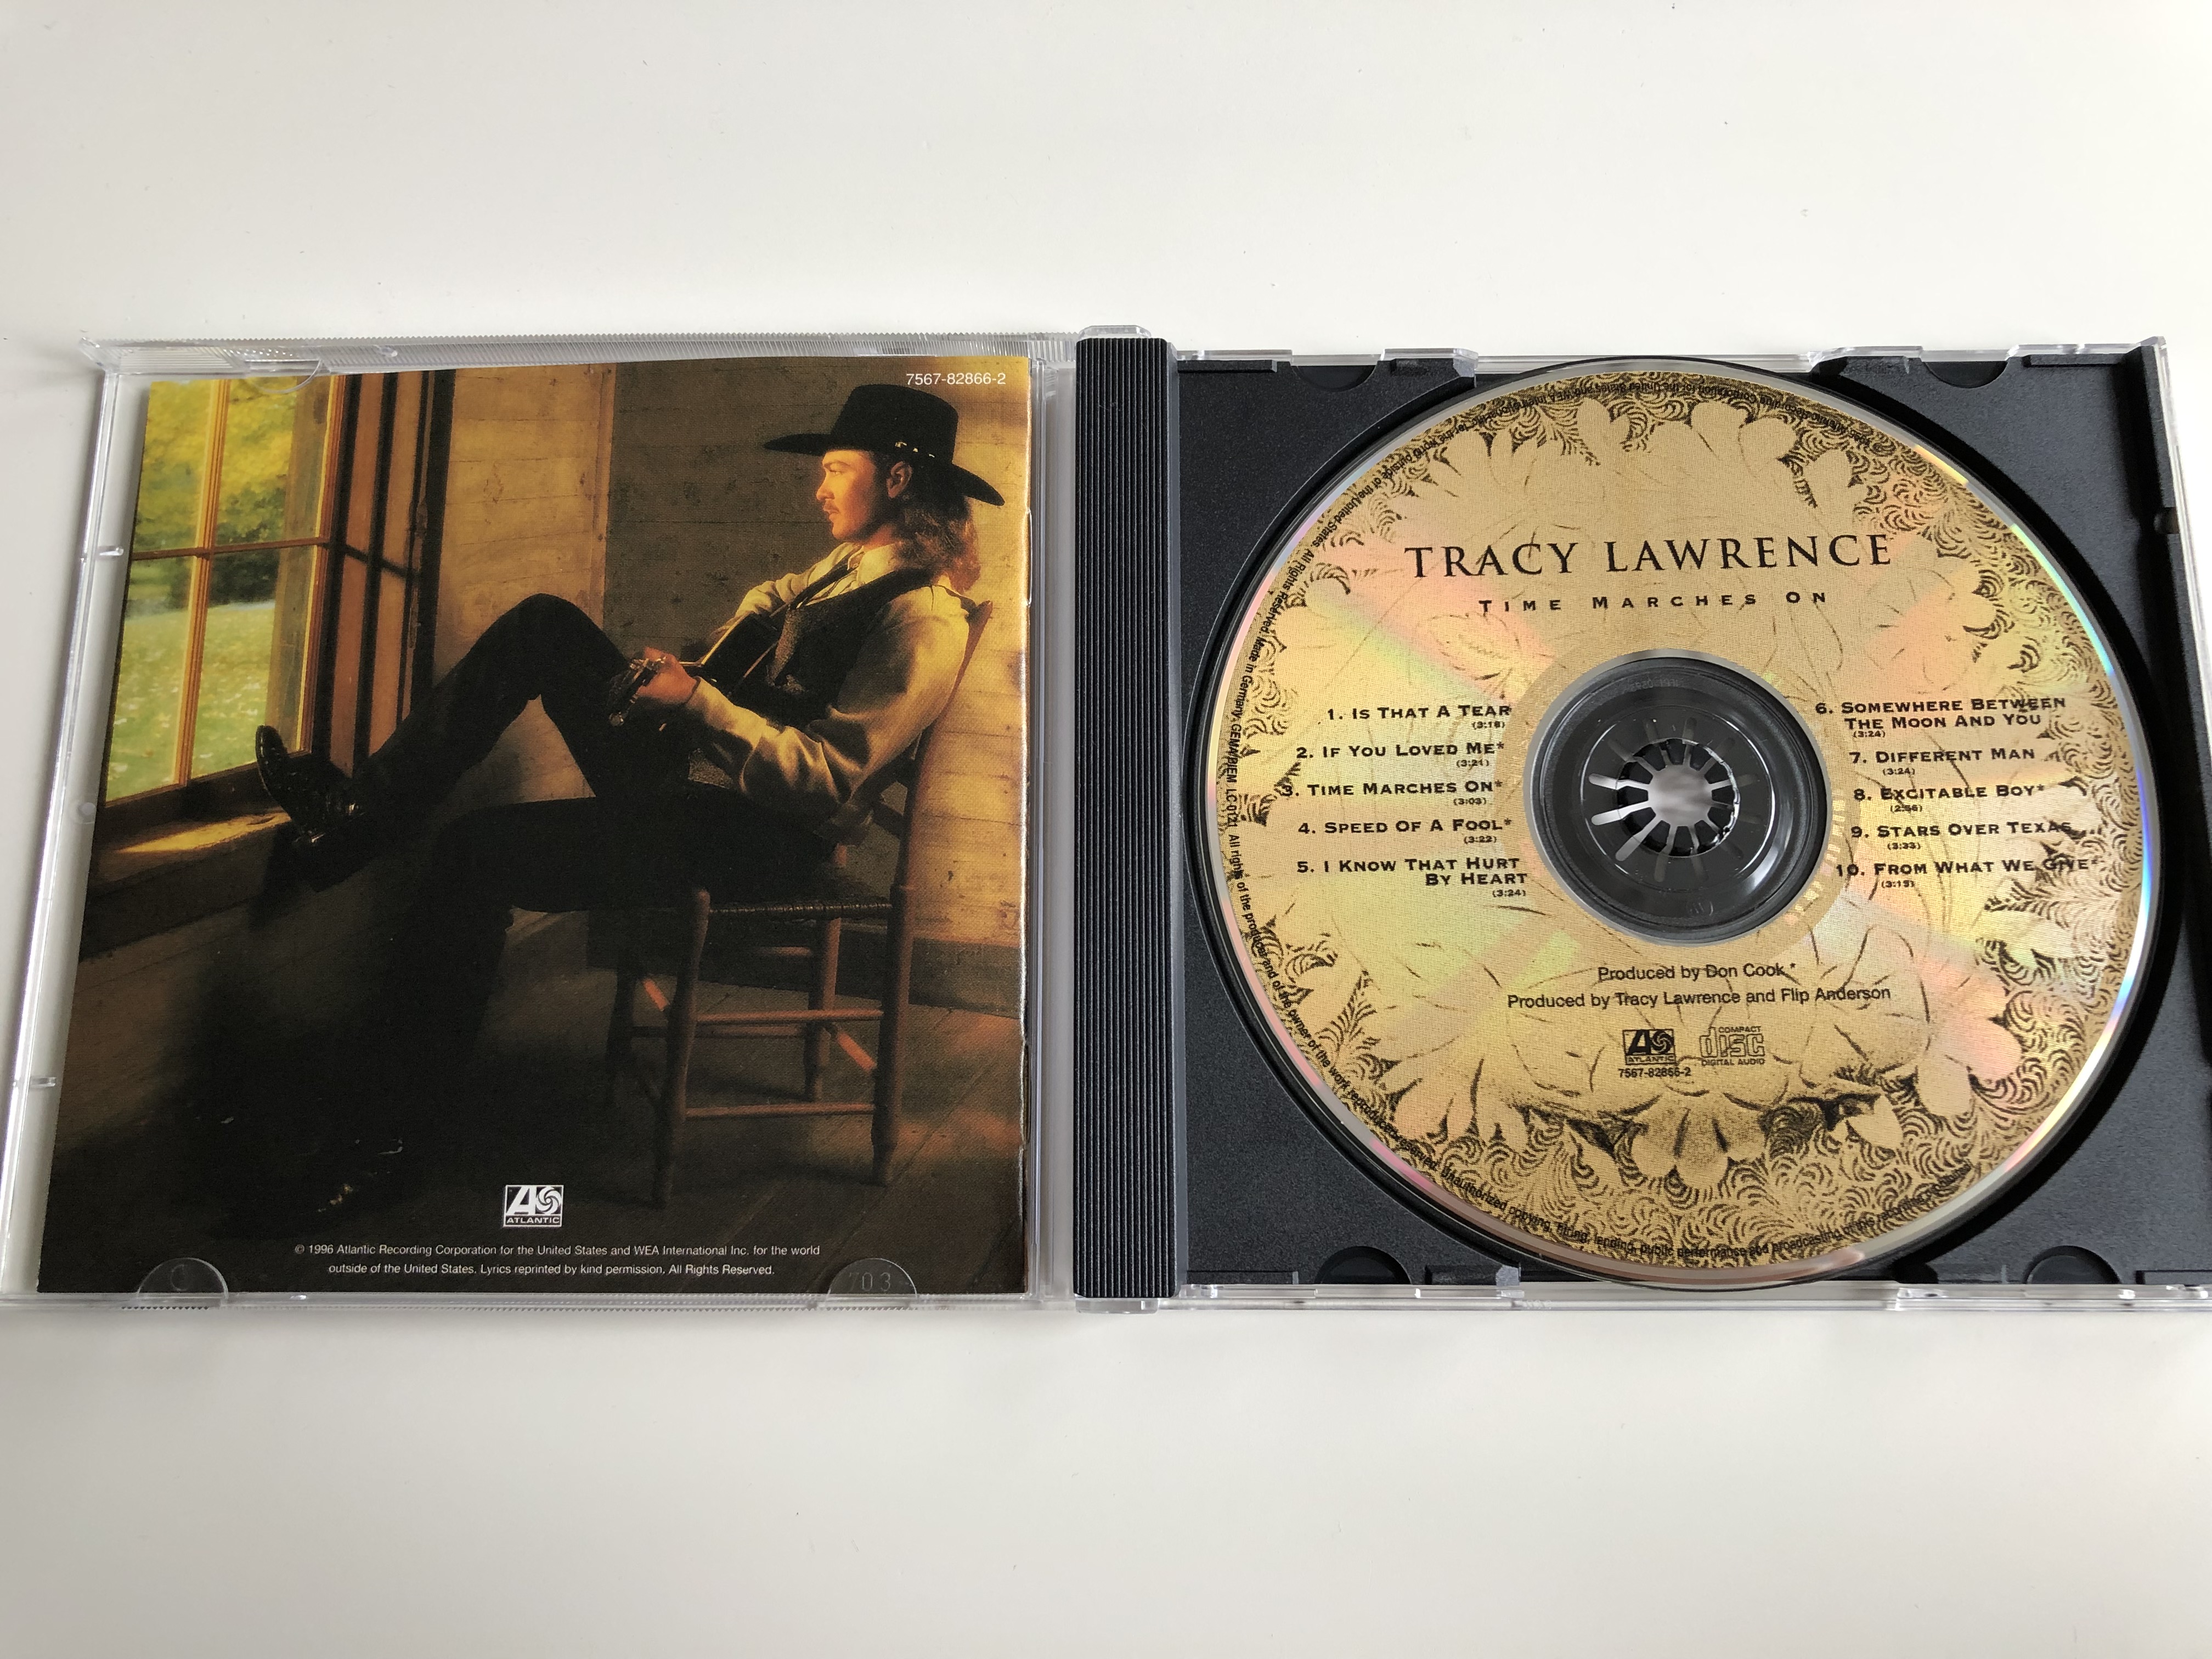 tracy-lawrence-time-marches-ontracy-lawrence-time-meaches-onimg-1710.jpg